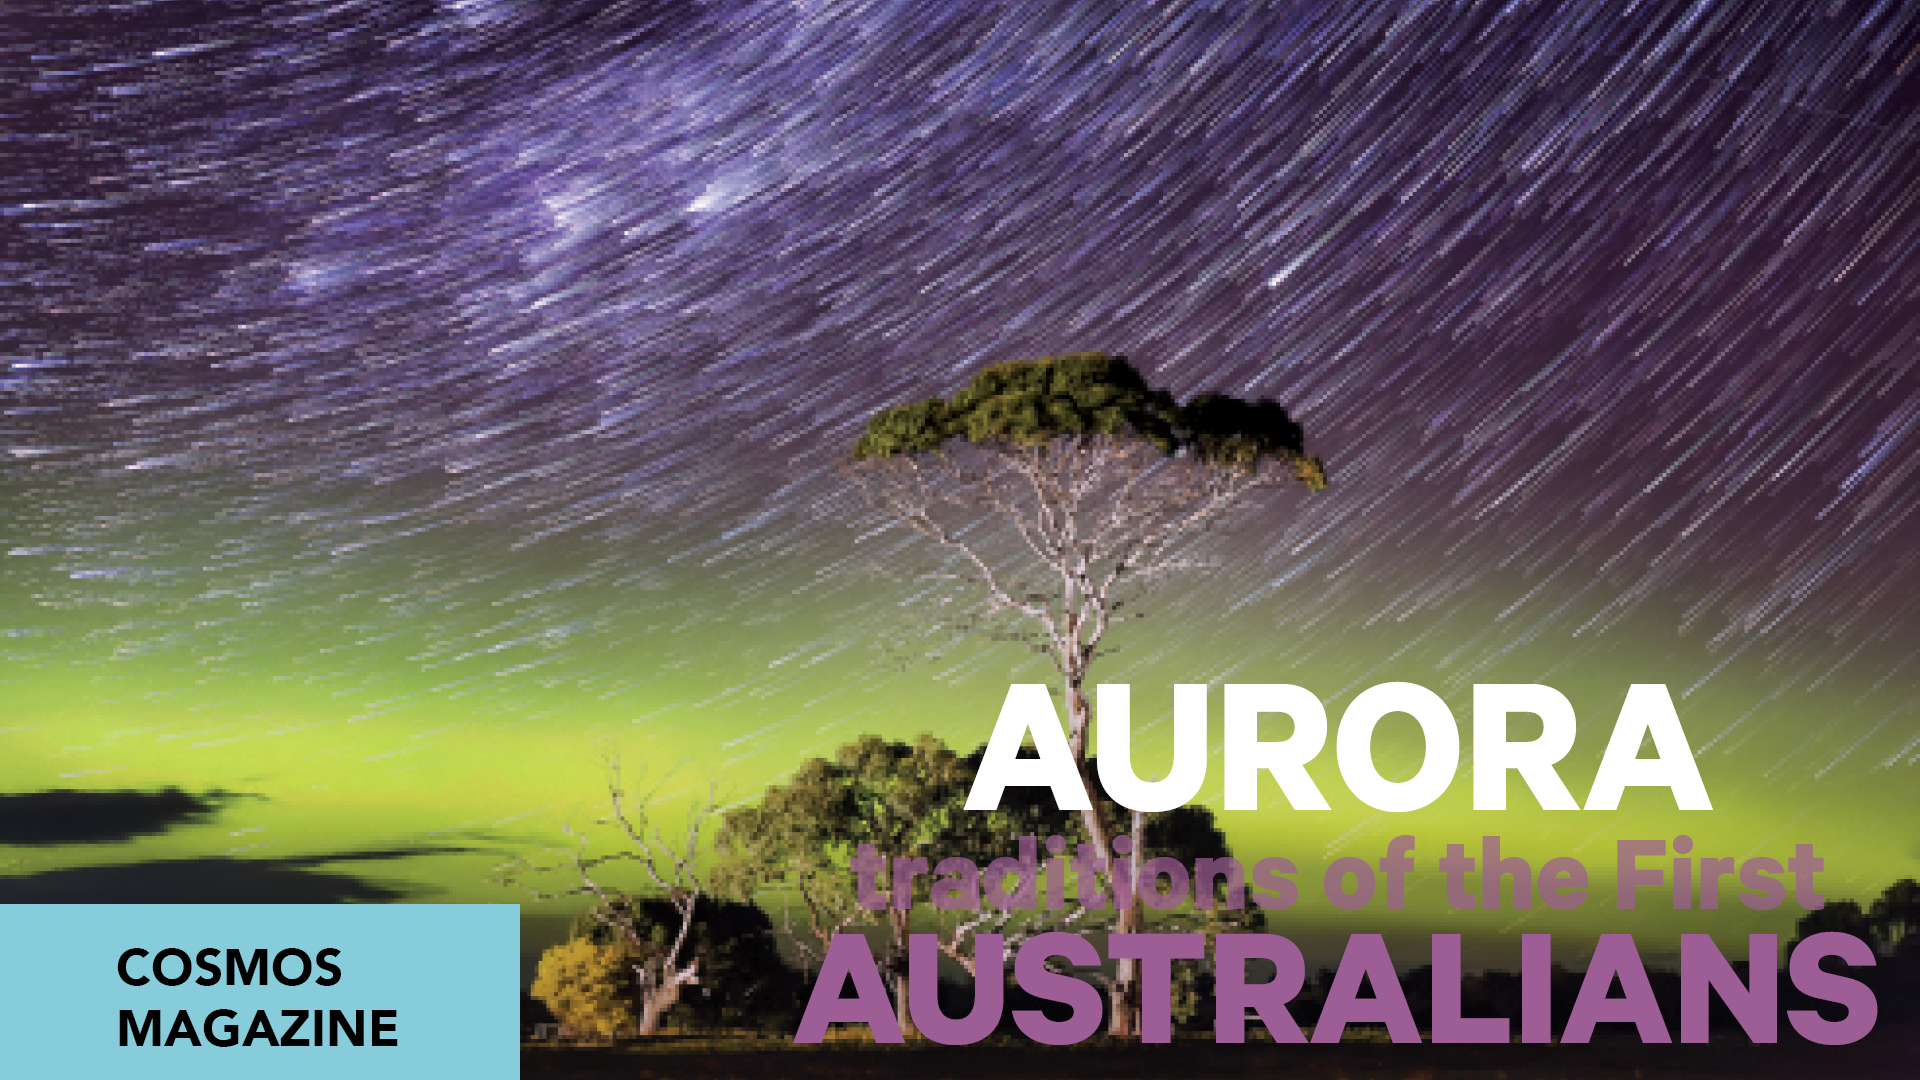 COSMOS Magazine: Aurora Traditions of the First Australians